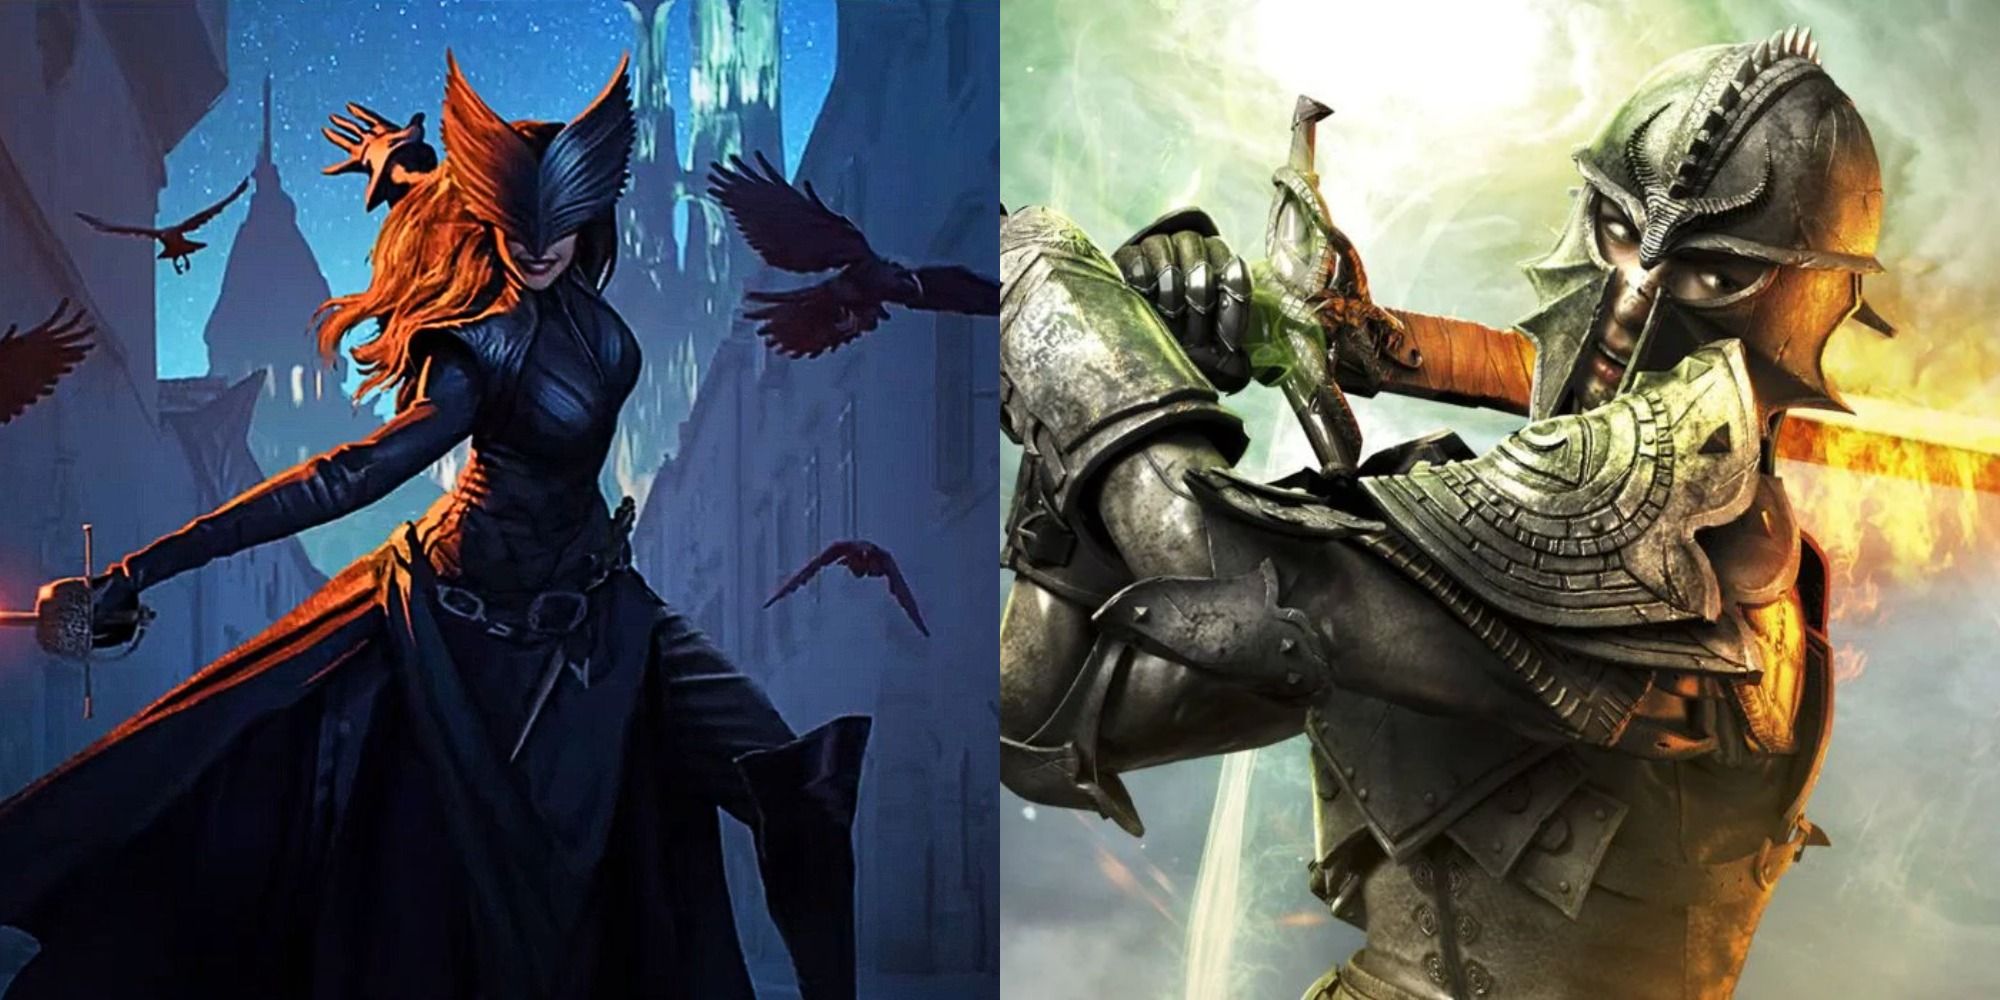 Split image showing a masked character in Dragon Age 4 and the Inquisitor in Dragon Age: Inquisition.